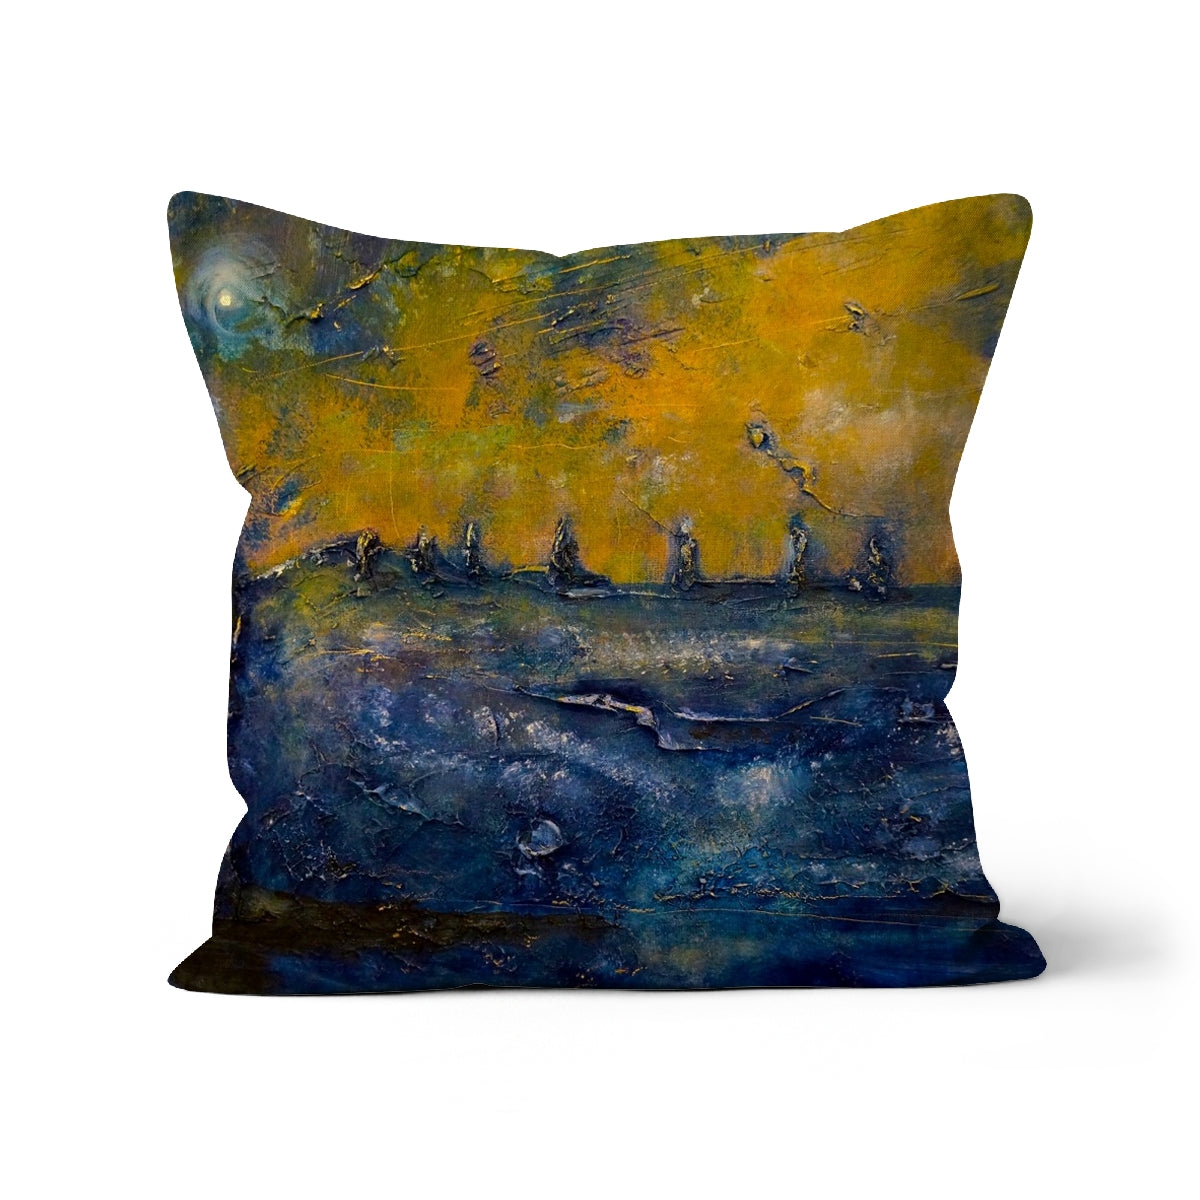 Brodgar Moonlight Orkney Art Gifts Cushion-Cushions-Orkney Art Gallery-Faux Suede-24"x24"-Paintings, Prints, Homeware, Art Gifts From Scotland By Scottish Artist Kevin Hunter